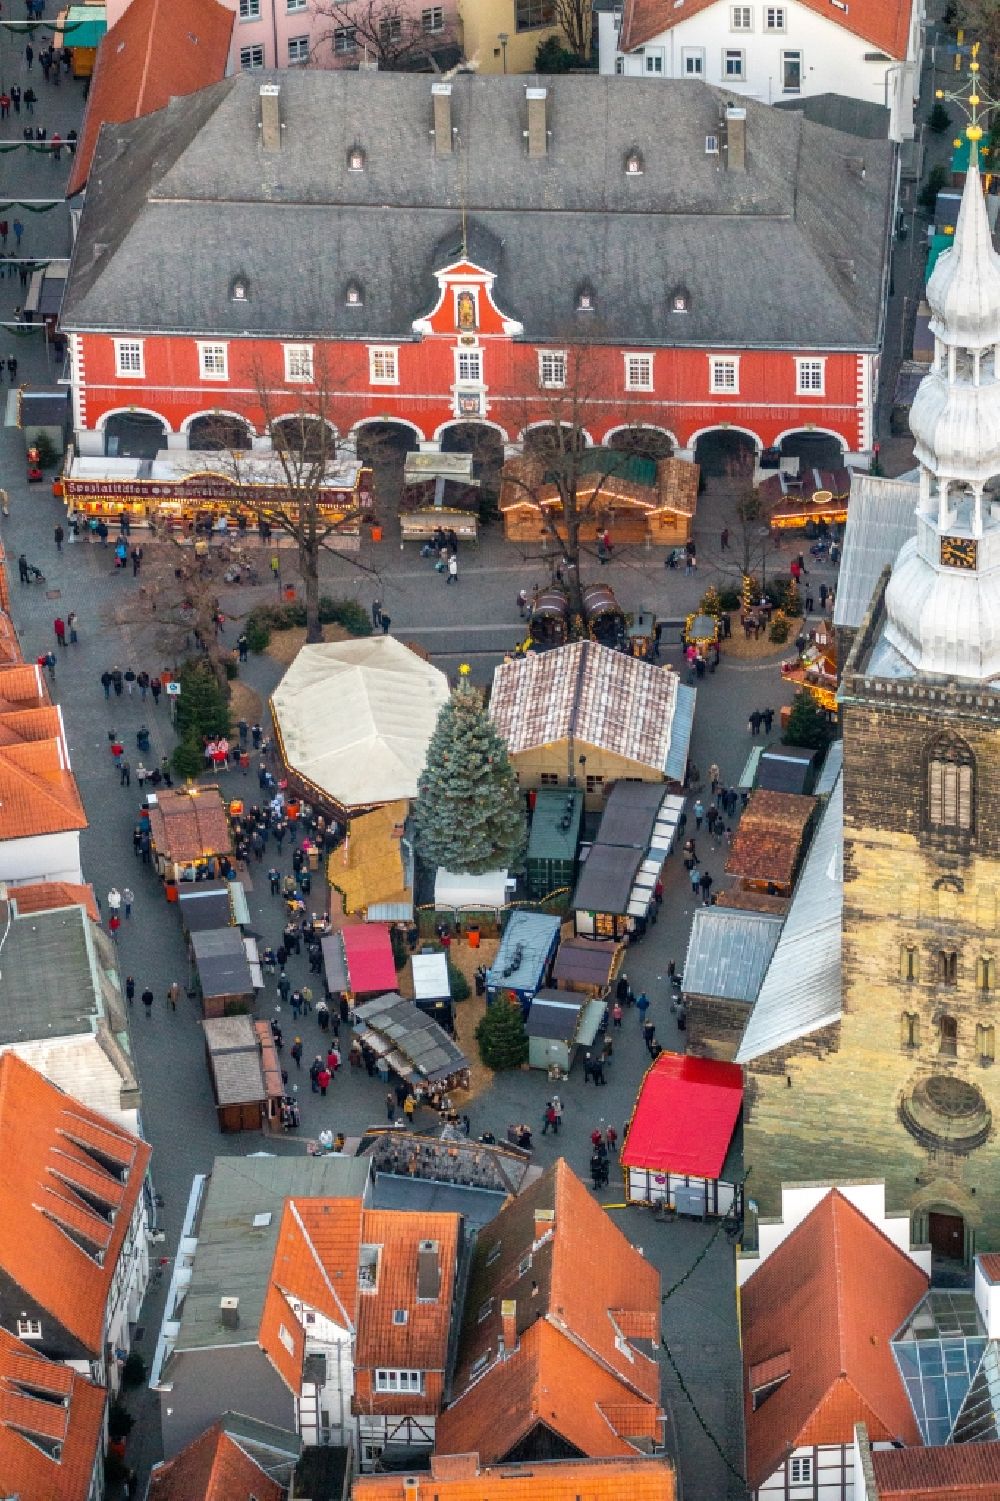 Aerial photograph Soest - Christmassy market event grounds and sale huts and booths on Petrikirchhof in Soest in the state North Rhine-Westphalia, Germany